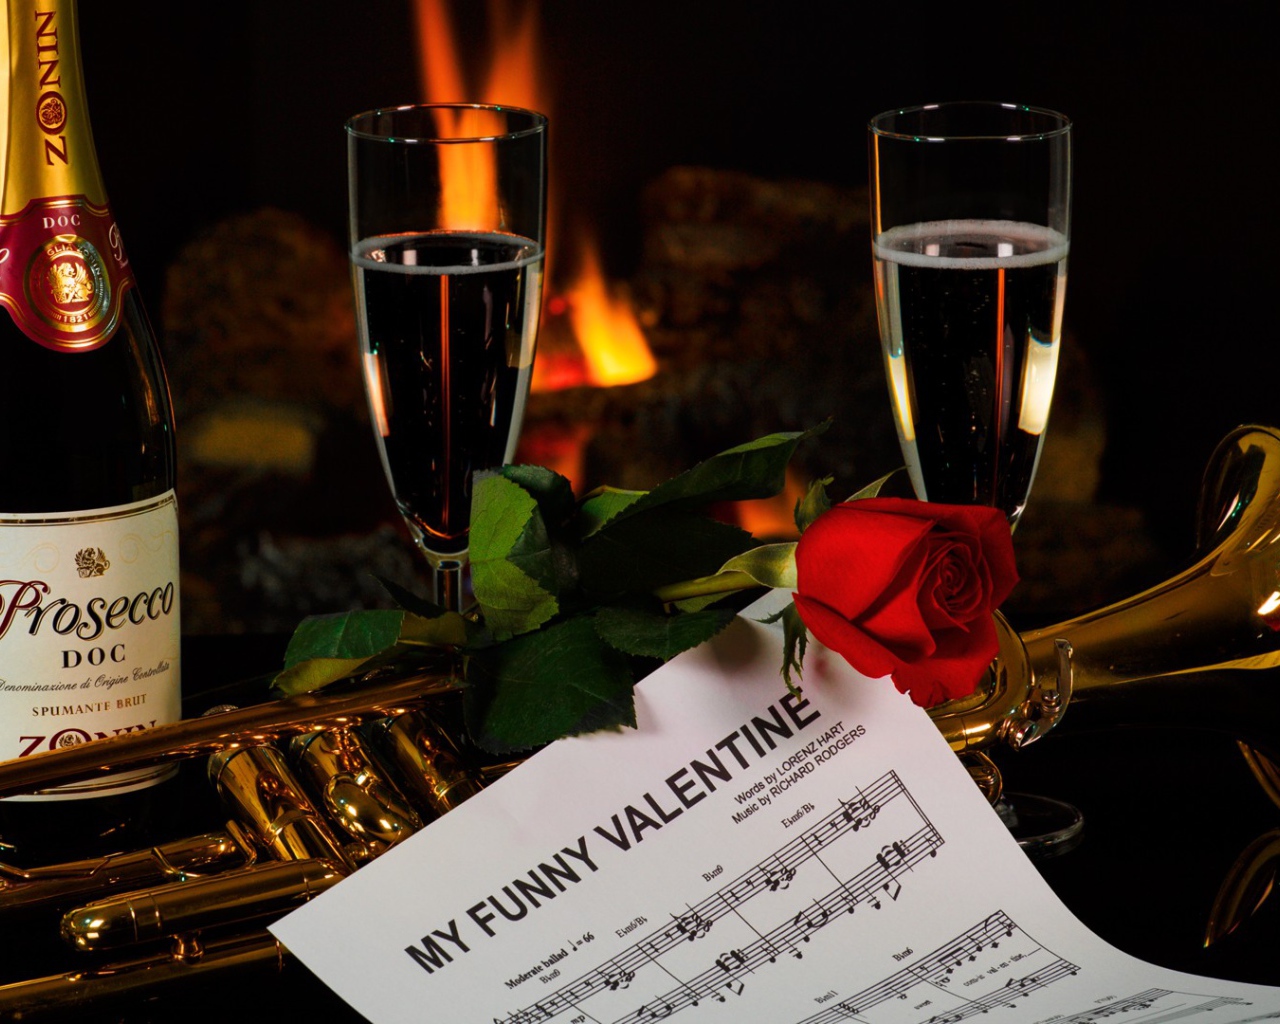 Romantic music and the wine lovers